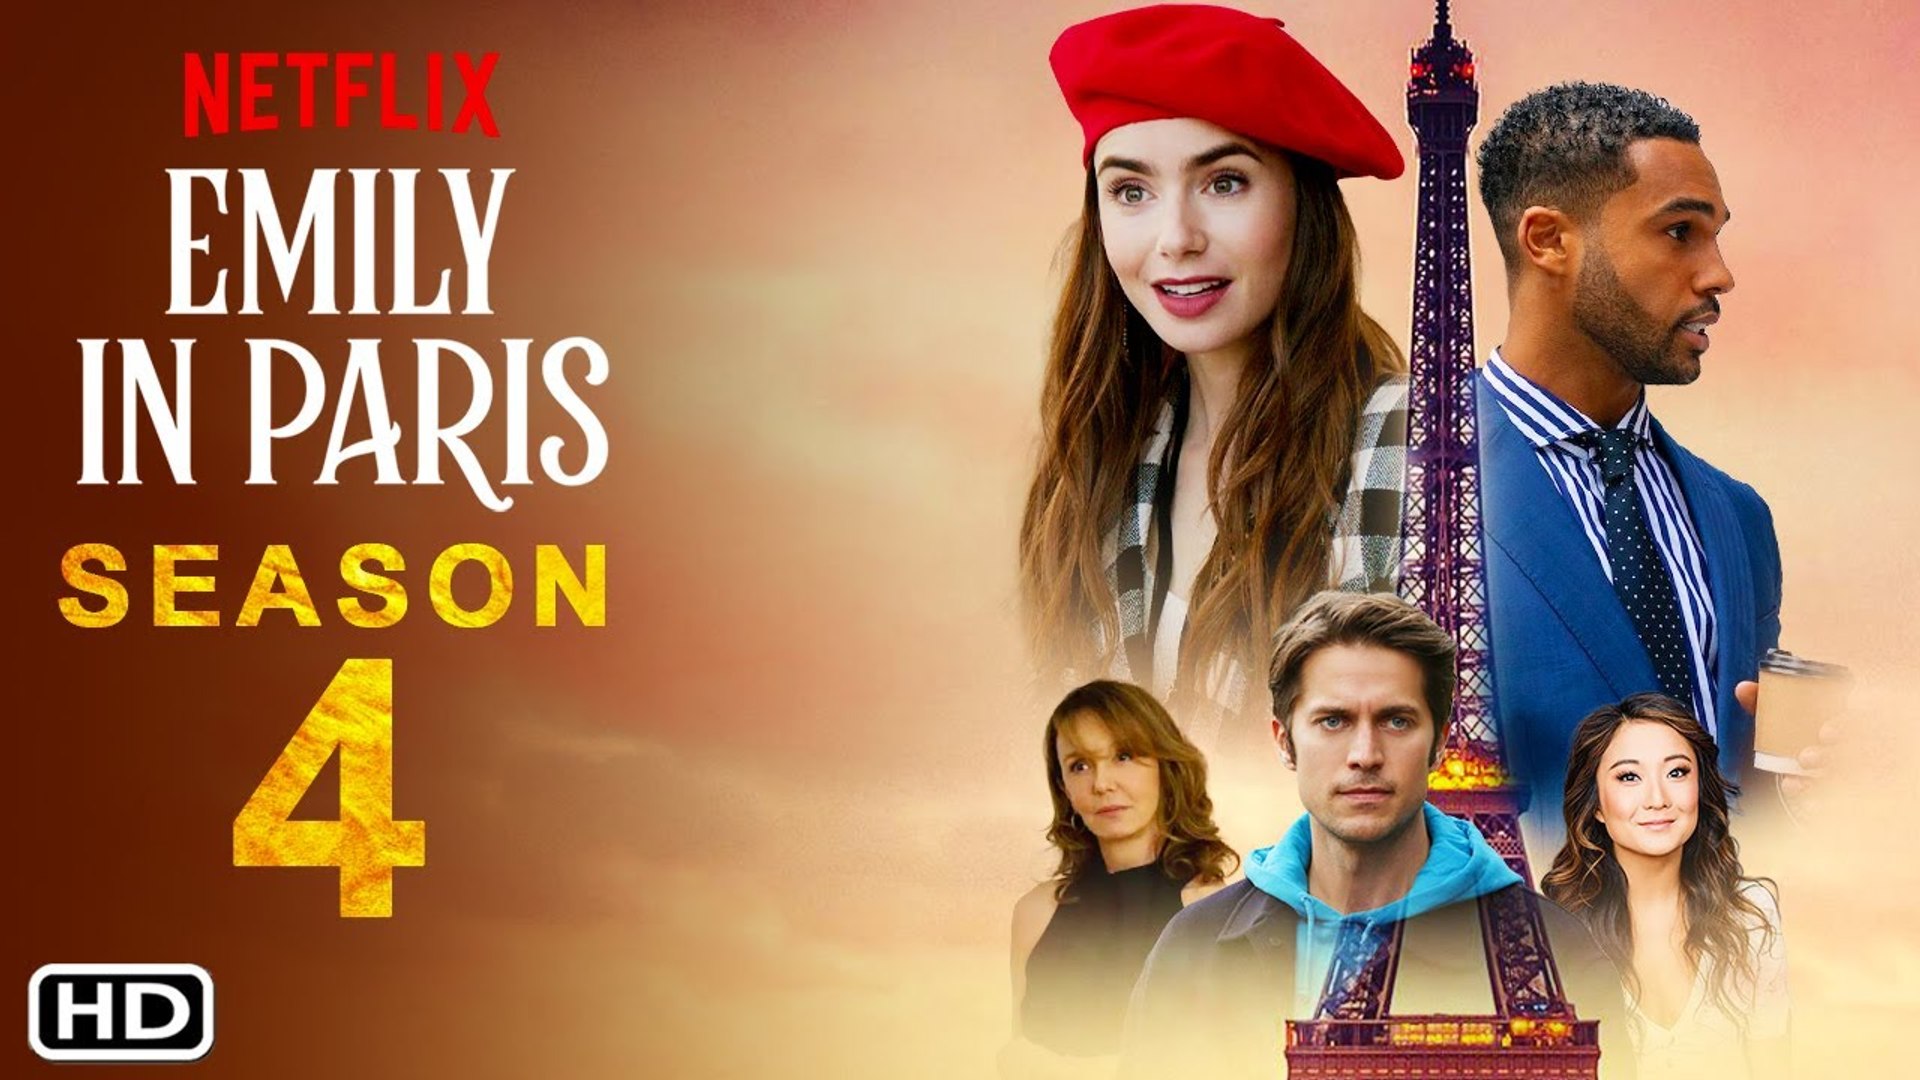 Emily in Paris season 2 trailer, release date, cast and more